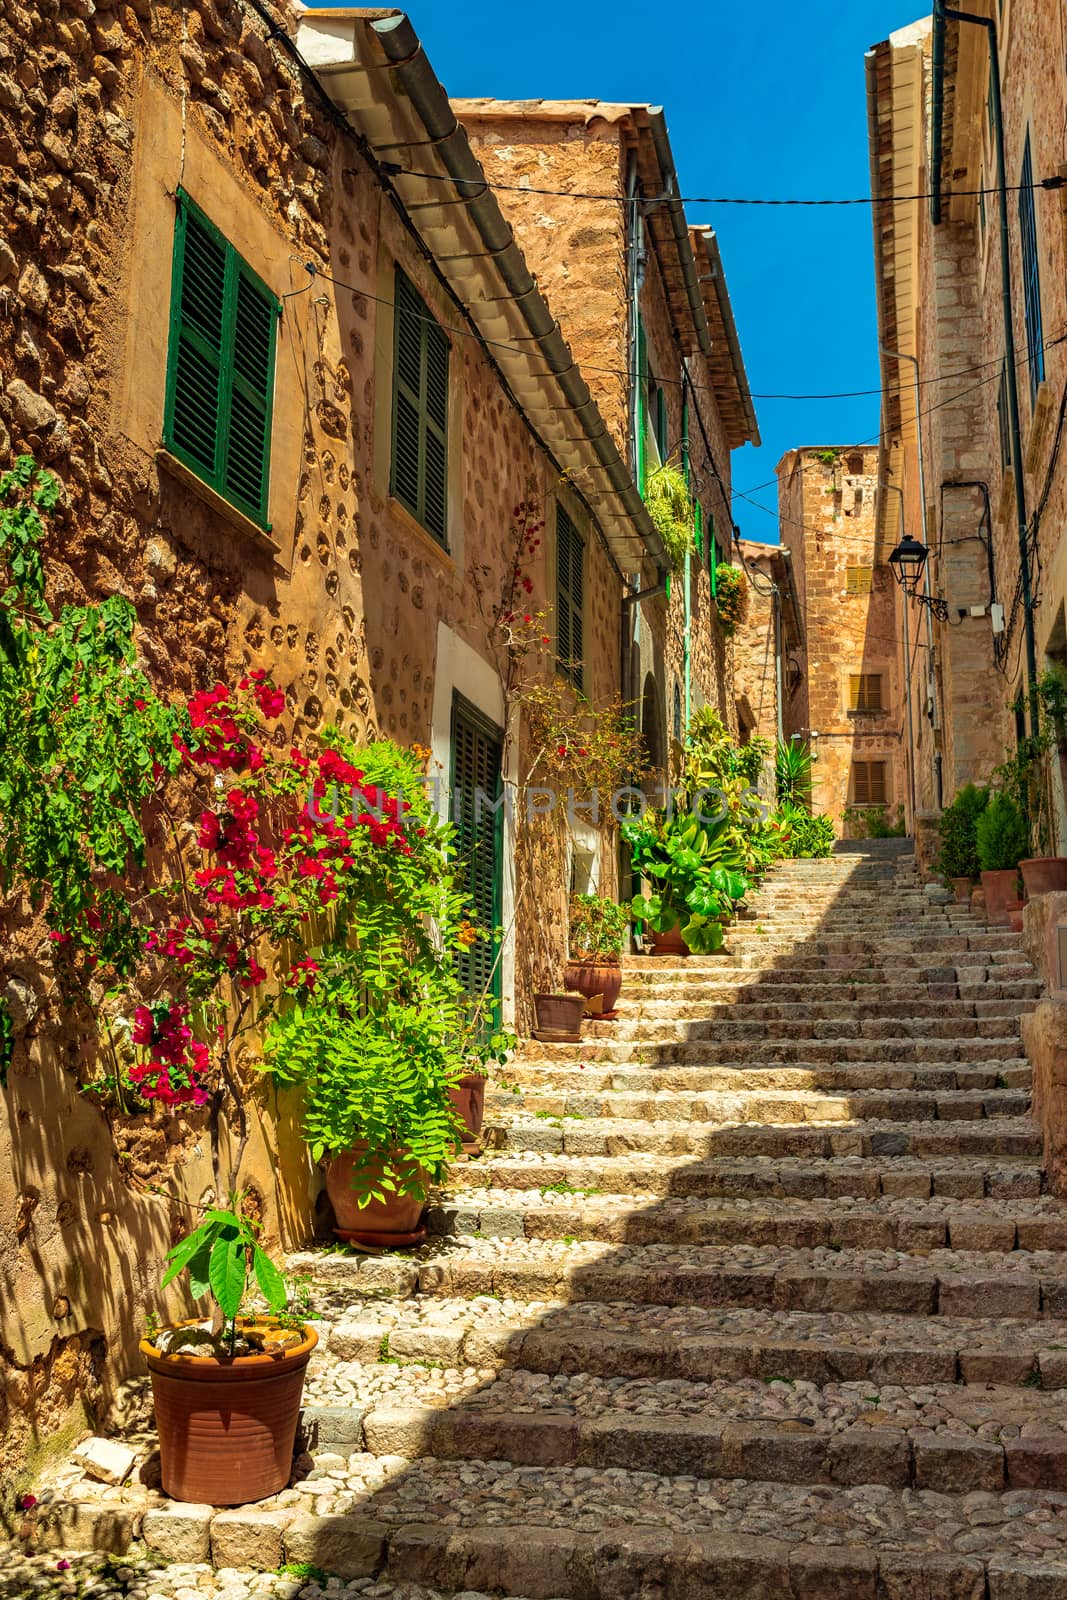 Plant street in old village Fornalutx, Majorca Spain by Vulcano